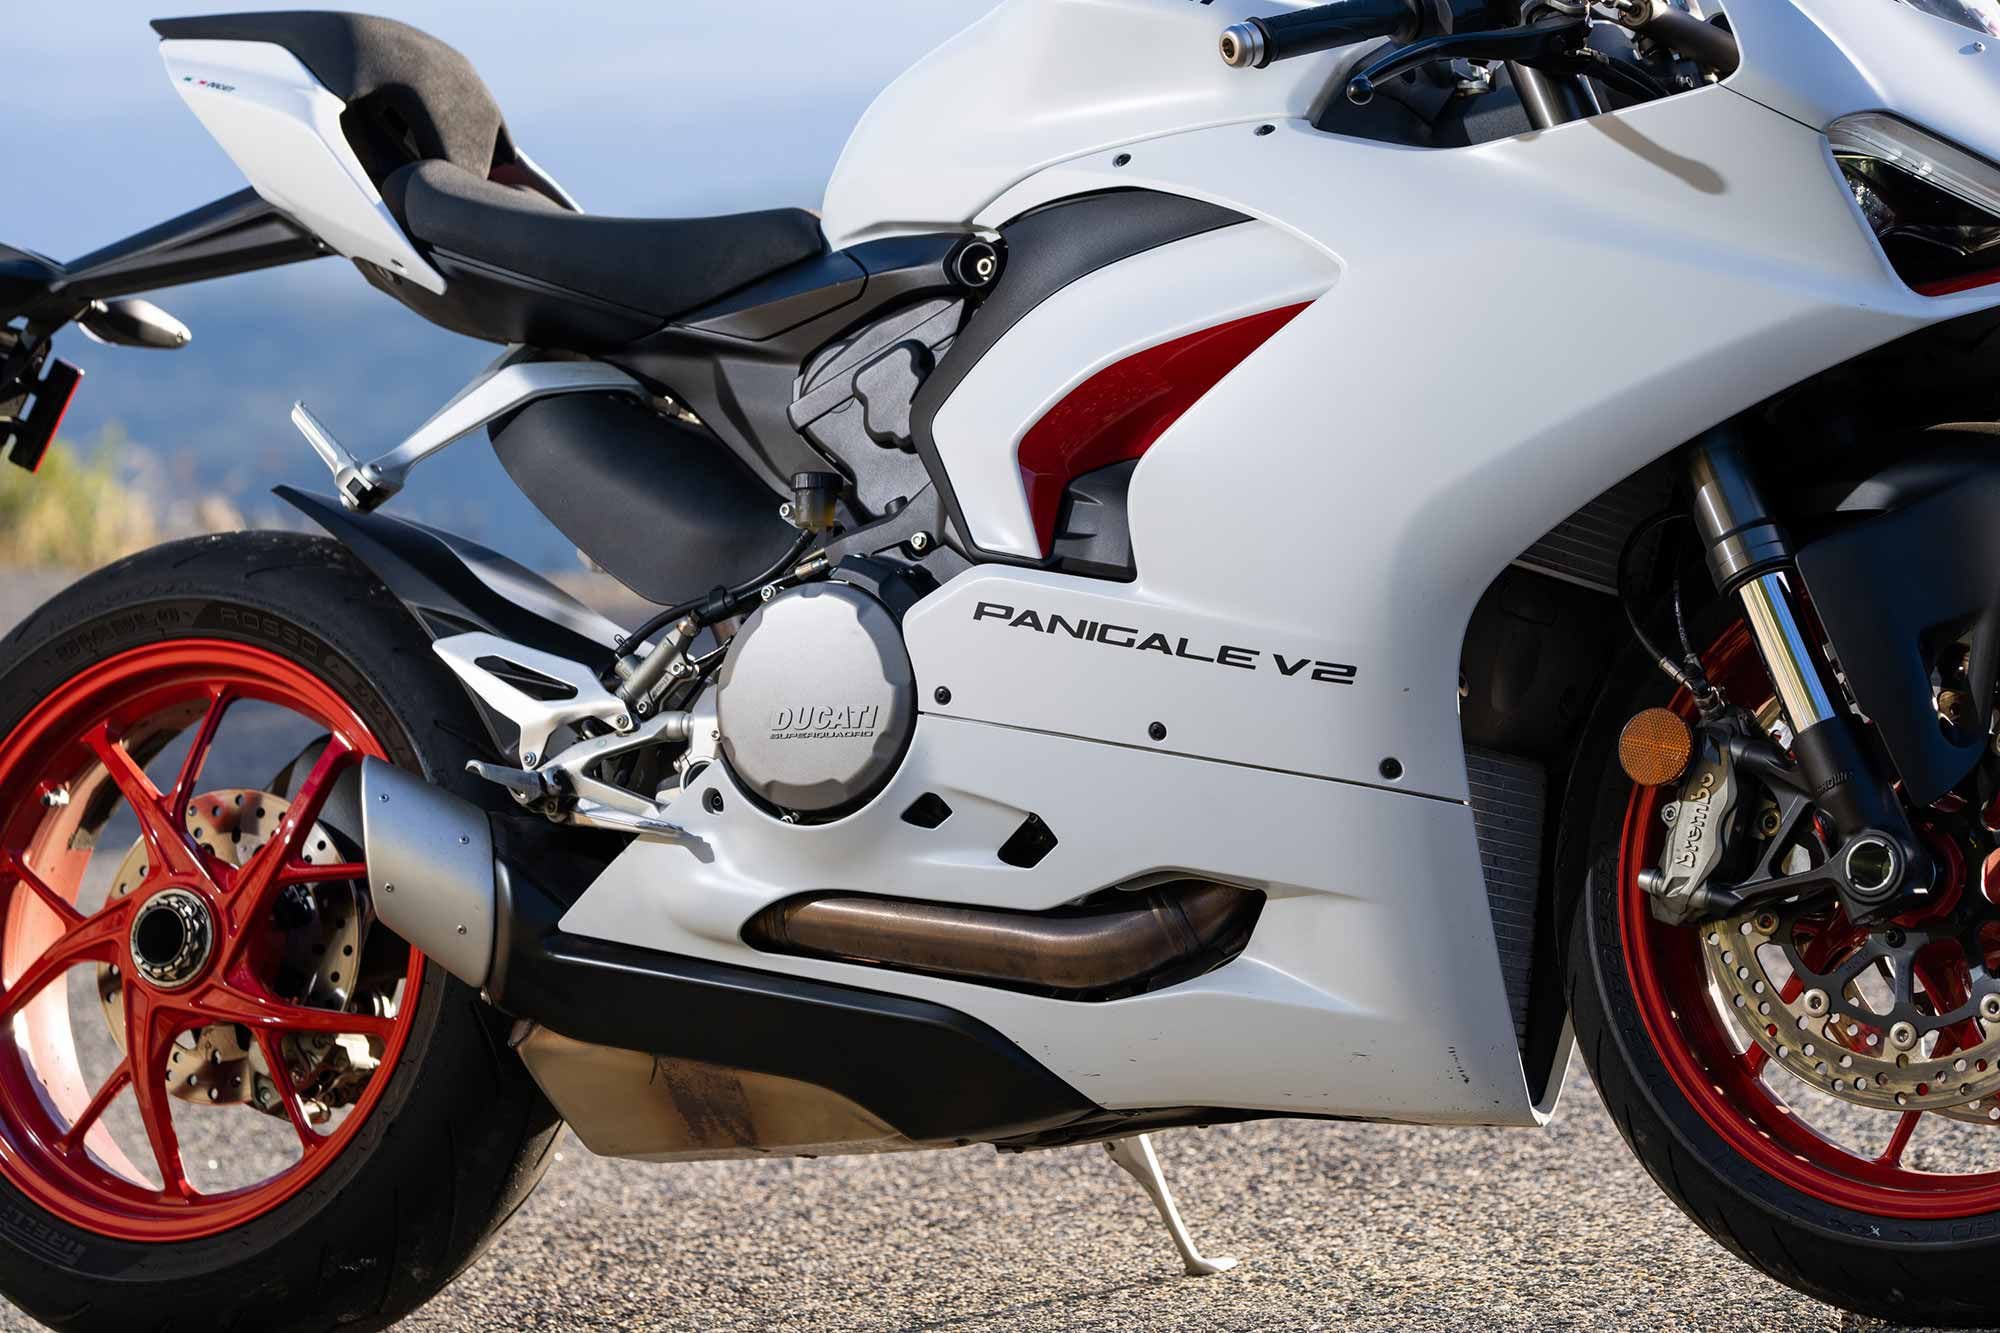 The Panigale V2 is powered by a rev-happy 955cc liquid-cooled L-twin.